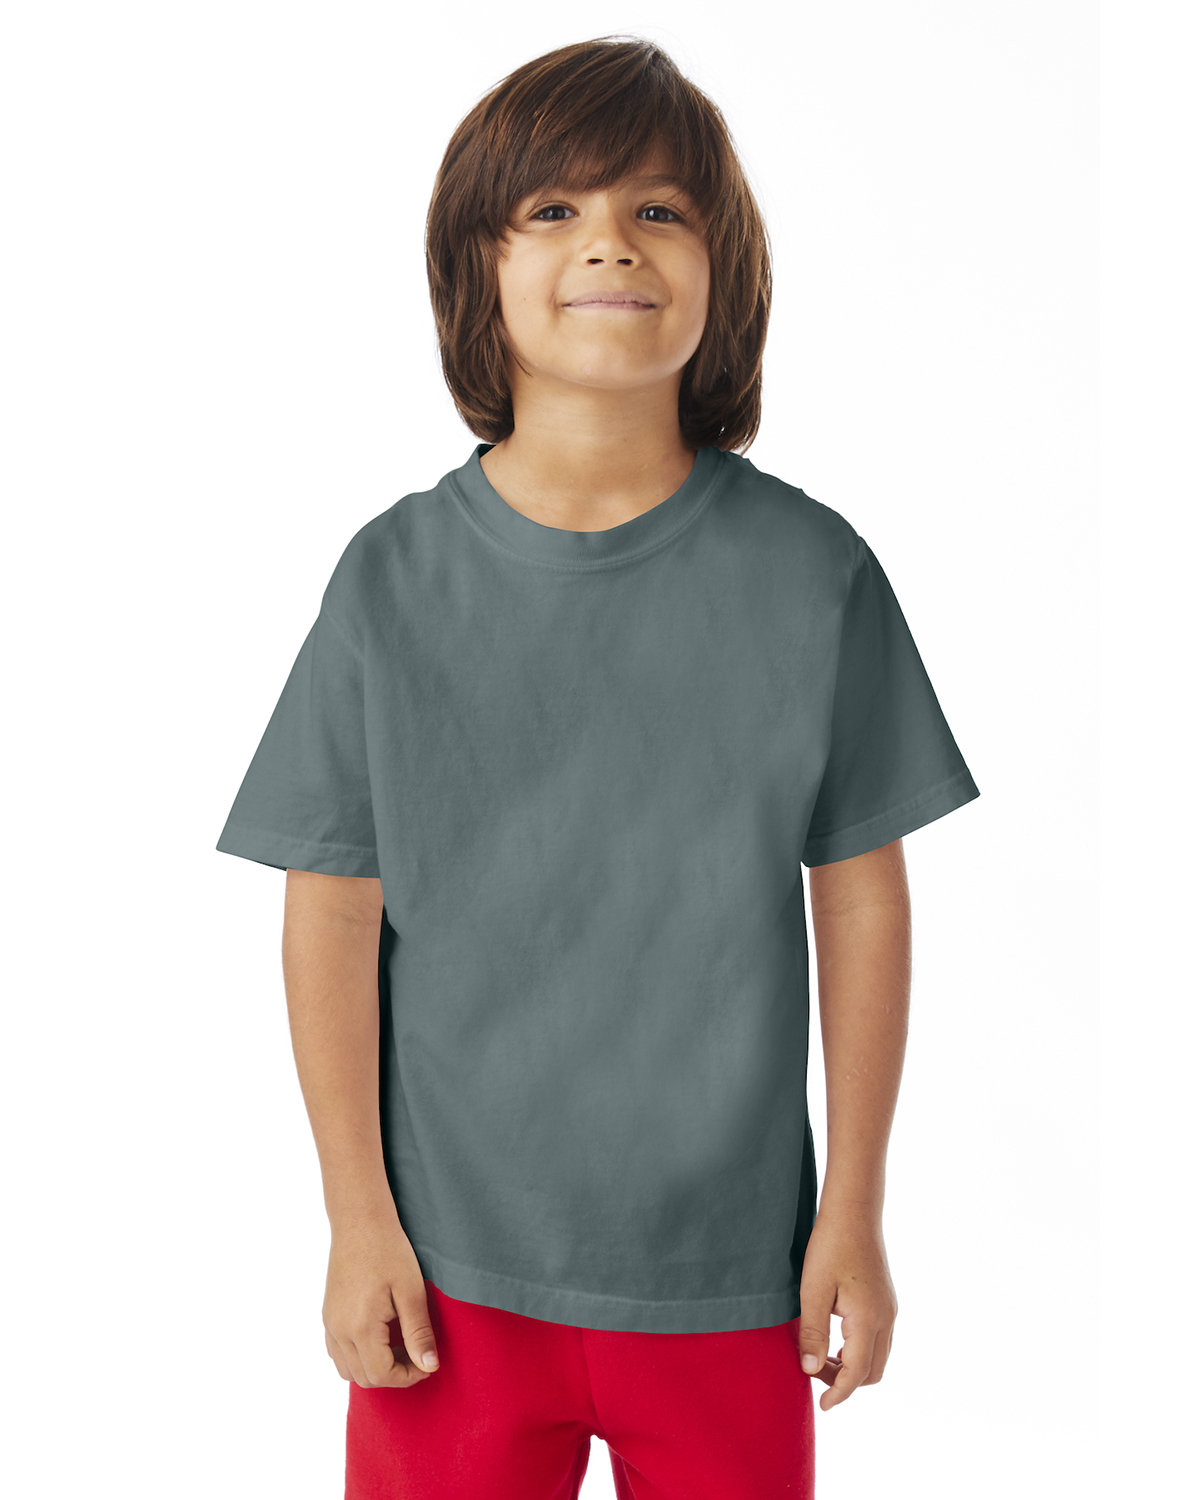 ComfortWash by Hanes Youth Garment-Dyed T-Shirt CYPRESS GREEN 